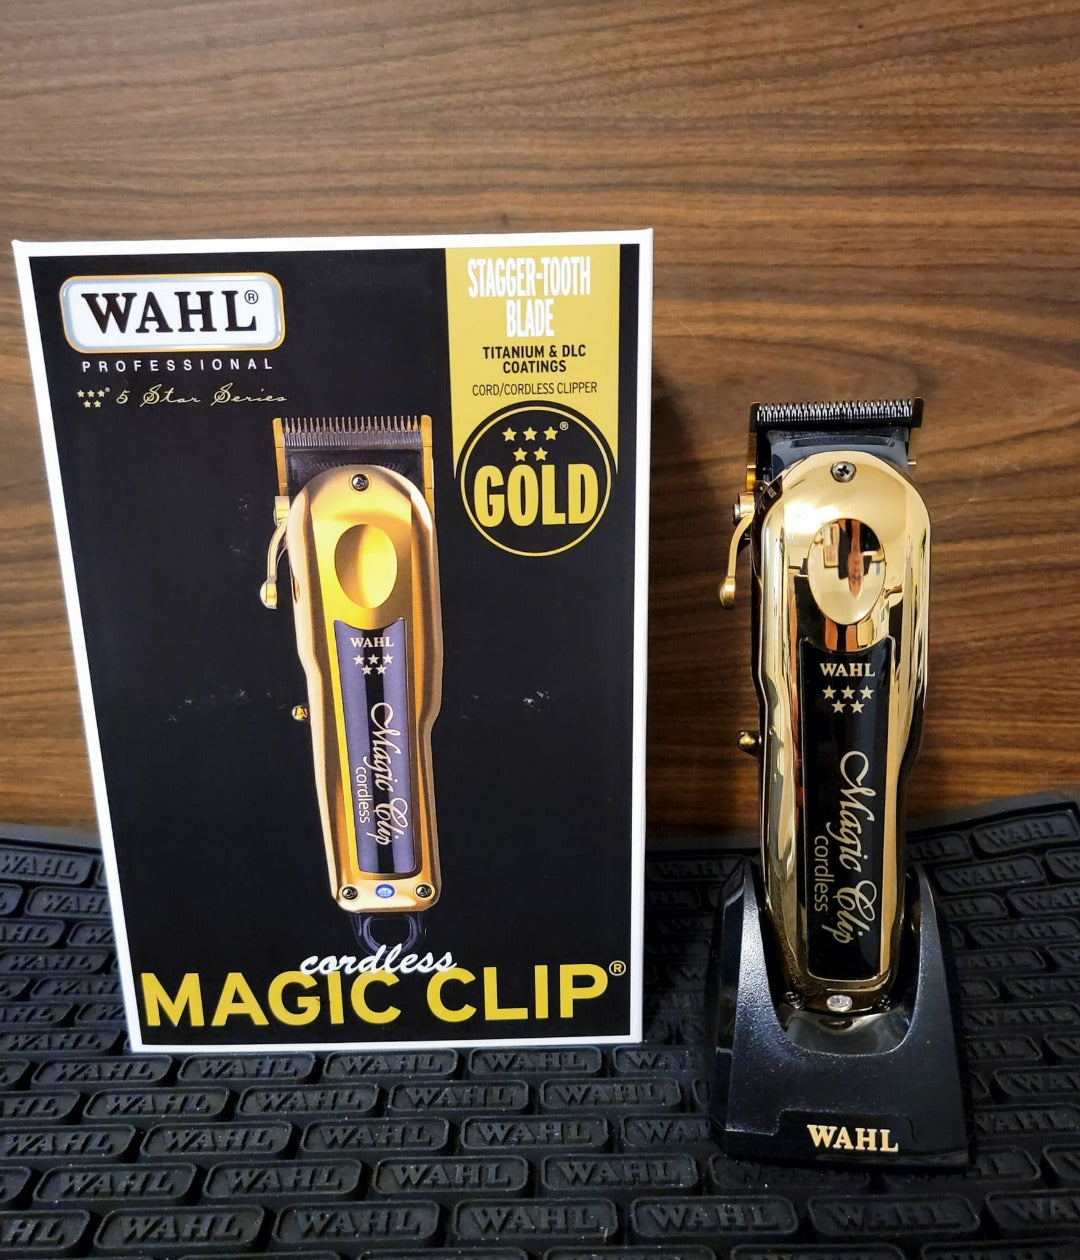  Wahl Professional 5 Star Limited Edition Gold Cordless